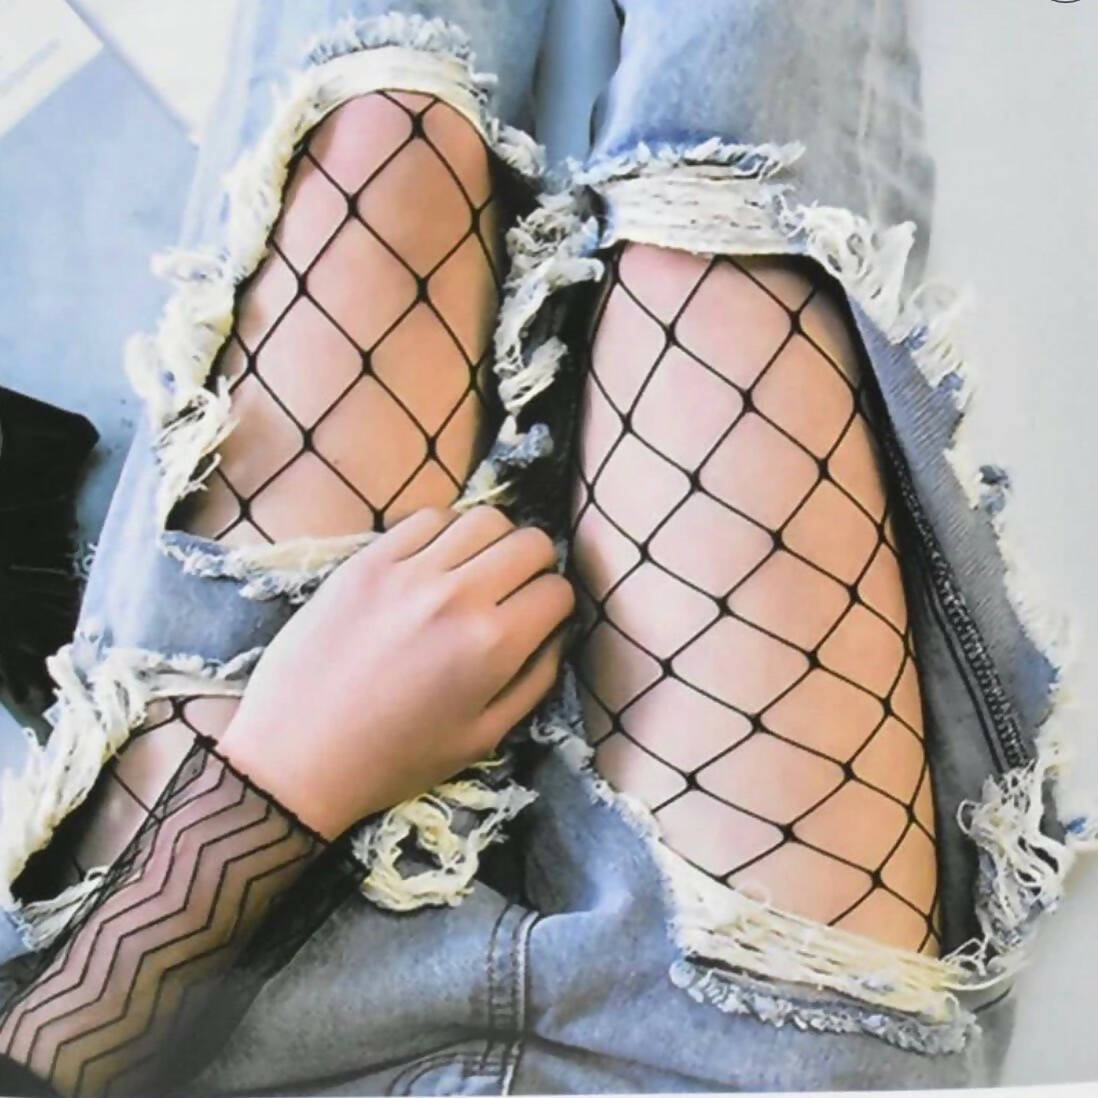 Chic fishnets Tights, Mesh Stockings, 3 Styles